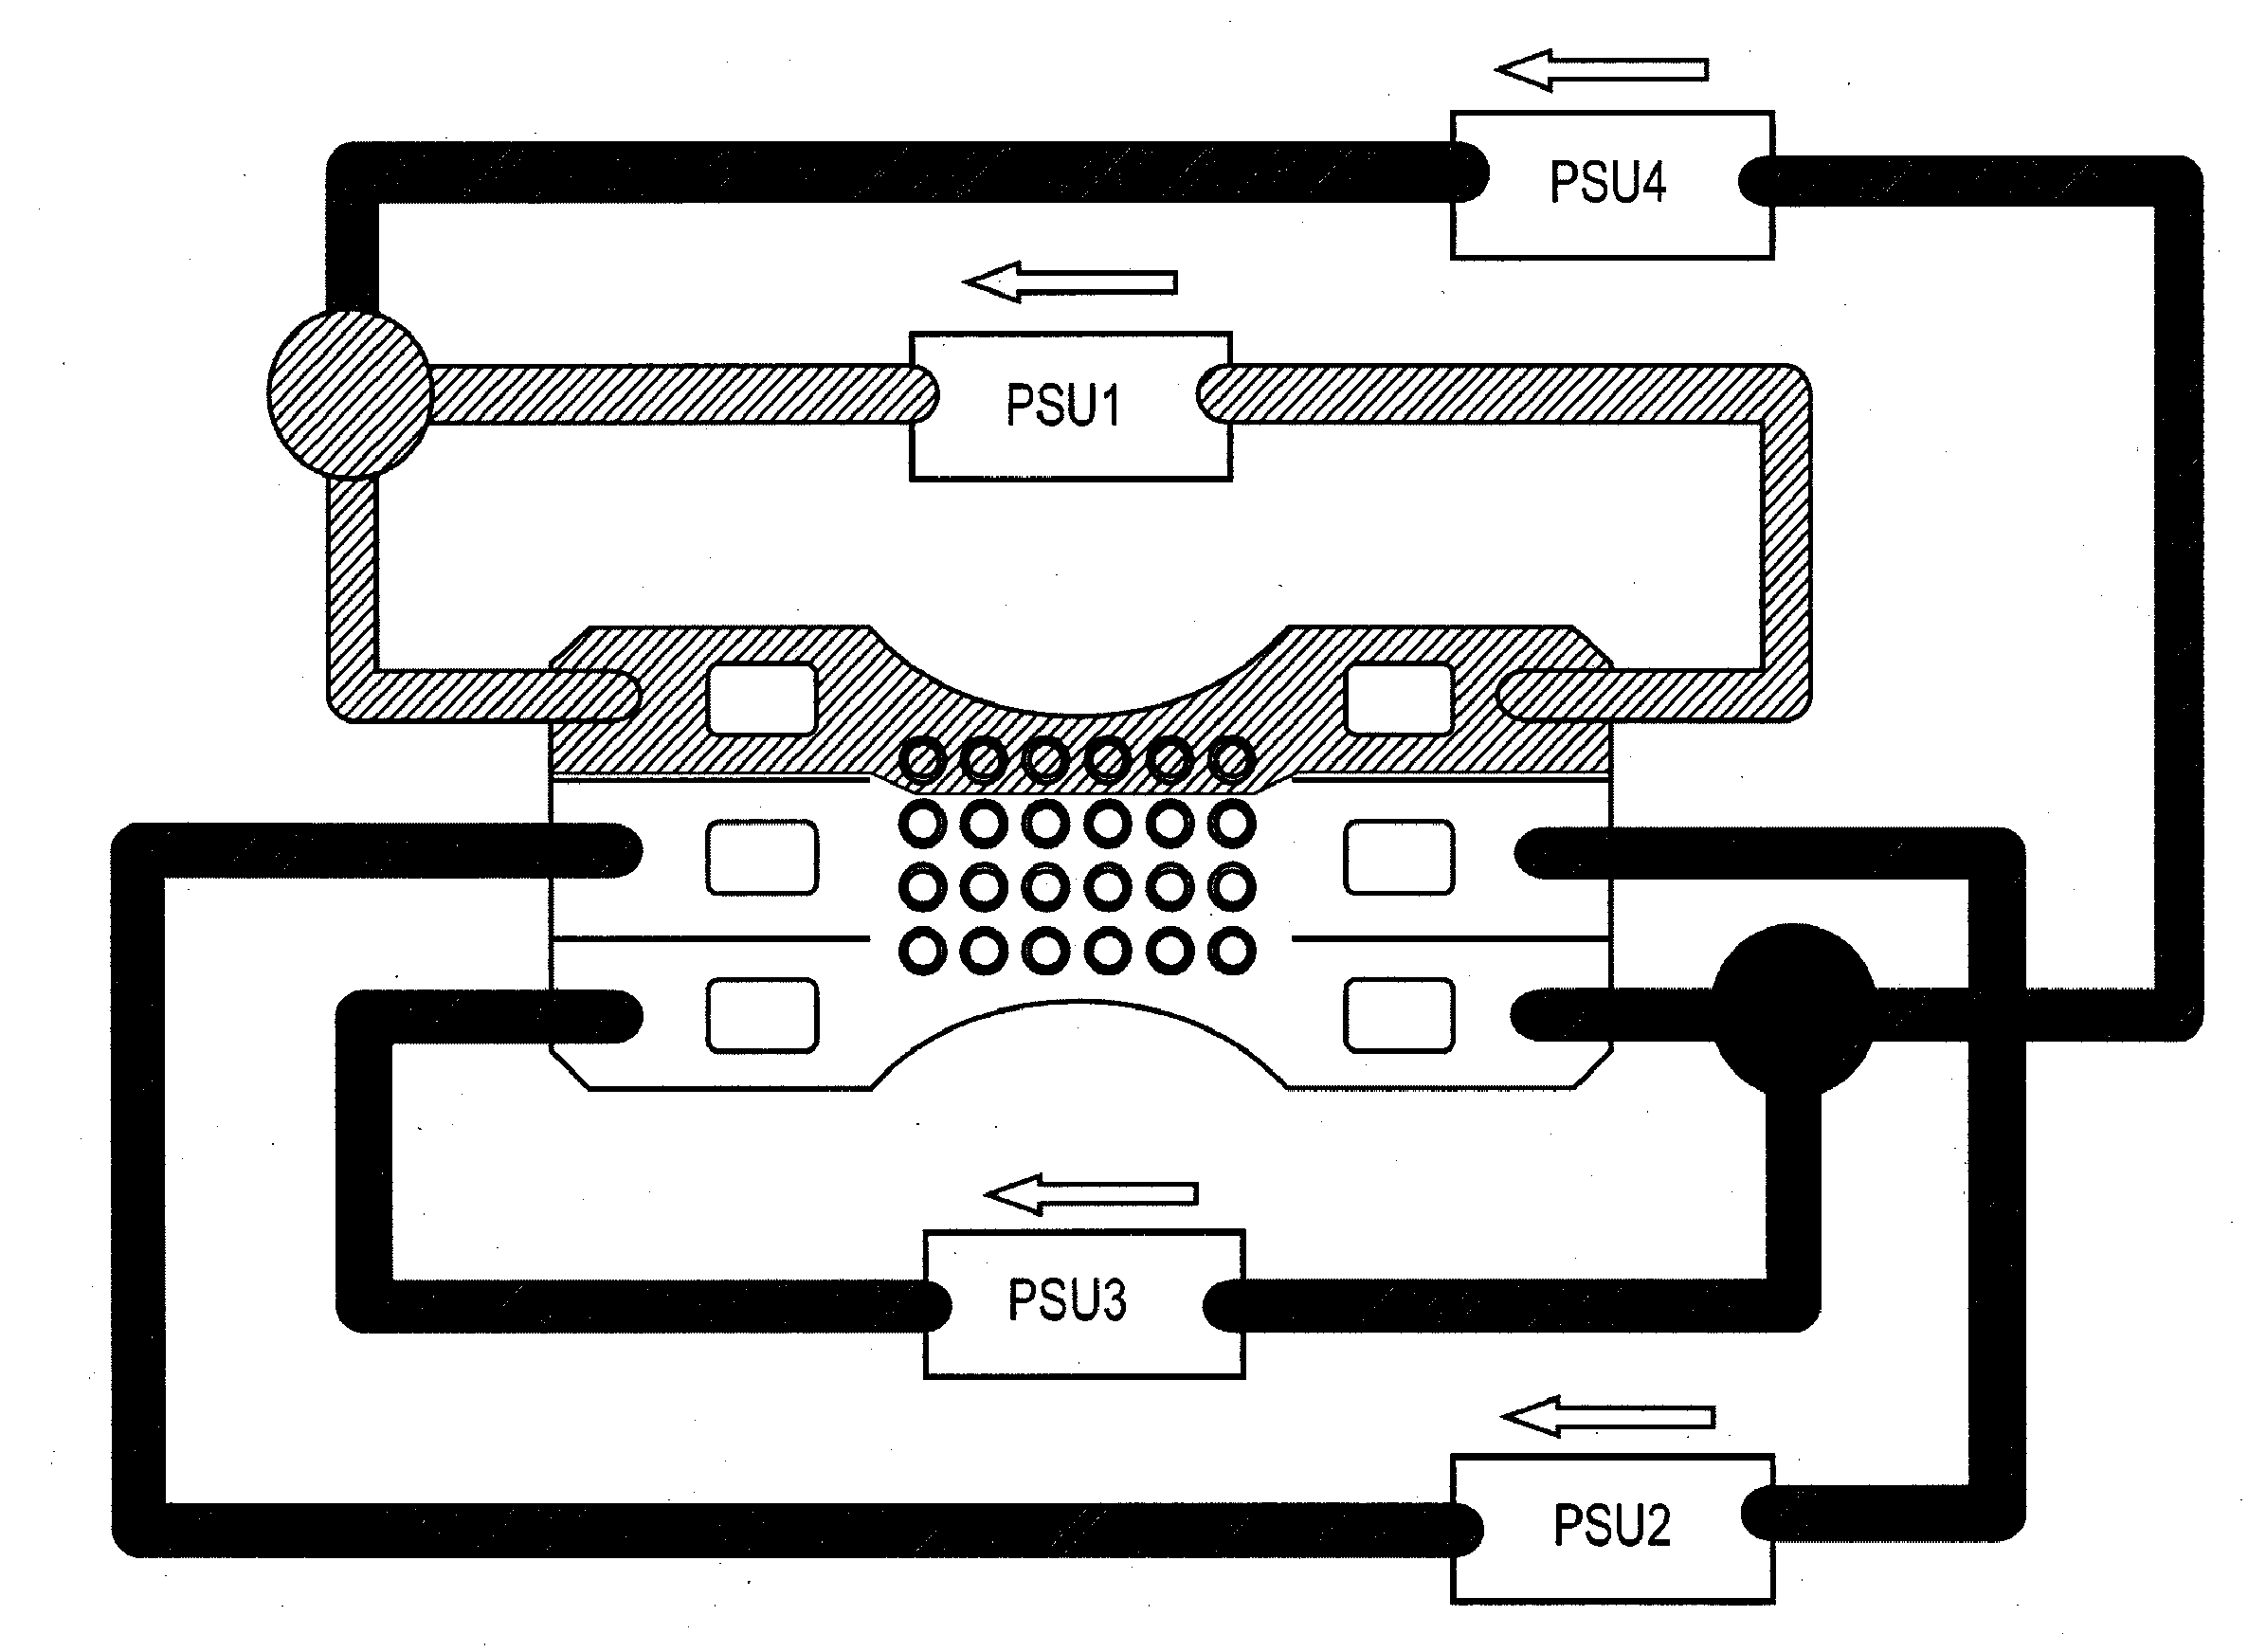 Methods and systems for fast PCR heating